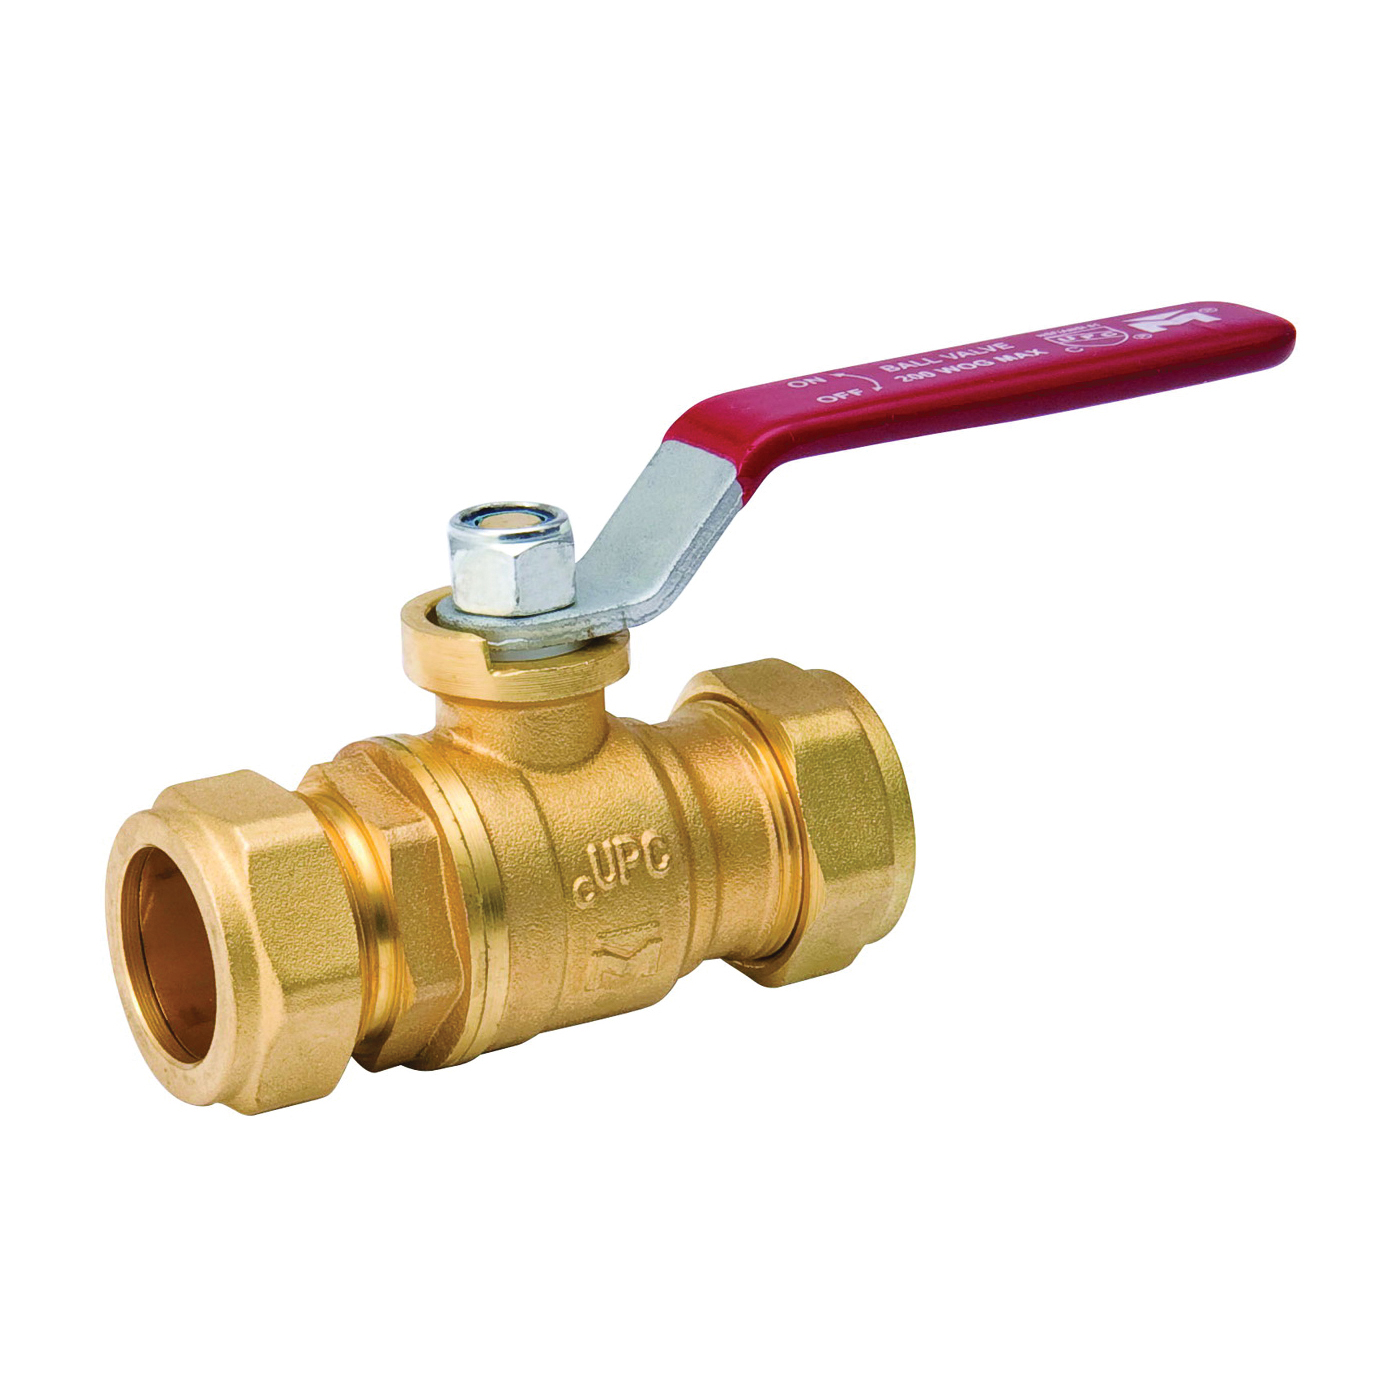 107-023NL Ball Valve, 1/2 in Connection, Compression, 200 psi Pressure, Manual Actuator, Brass Body